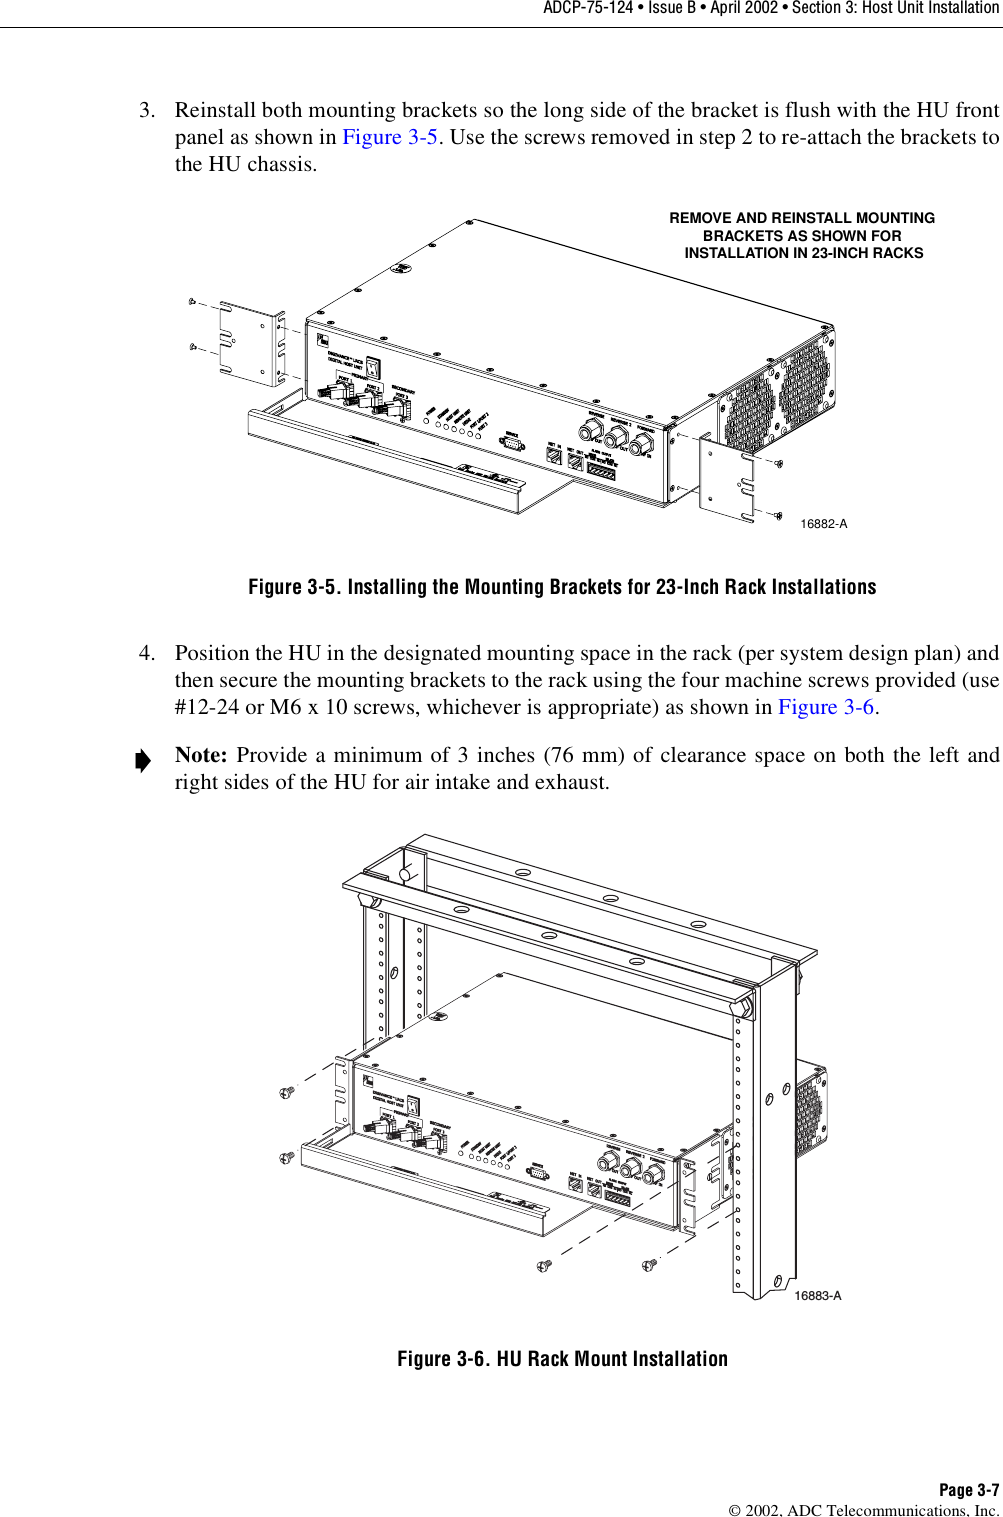 ADCP-75-124 • Issue B • April 2002 • Section 3: Host Unit InstallationPage 3-7©2002, ADC Telecommunications, Inc.3. Reinstall both mounting brackets so the long side of the bracket is flush with the HU frontpanel as shown in Figure 3-5.Use the screws removed in step 2to re-attach the brackets tothe HU chassis.Figure 3-5. Installing the Mounting Brackets for 23-Inch Rack Installations4. Position the HU in the designated mounting space in the rack (per system design plan) andthen secure the mounting brackets to the rack using the four machine screws provided (use#12-24 or M6 x10 screws, whichever is appropriate) as shown in Figure 3-6.Figure 3-6. HU Rack Mount InstallationNote: Provide aminimum of 3inches (76 mm) of clearance space on both the left andright sides of the HU for air intake and exhaust.16882-AREMOVE AND REINSTALL MOUNTINGBRACKETS AS SHOWN FOR INSTALLATION IN 23-INCH RACKS16883-A 